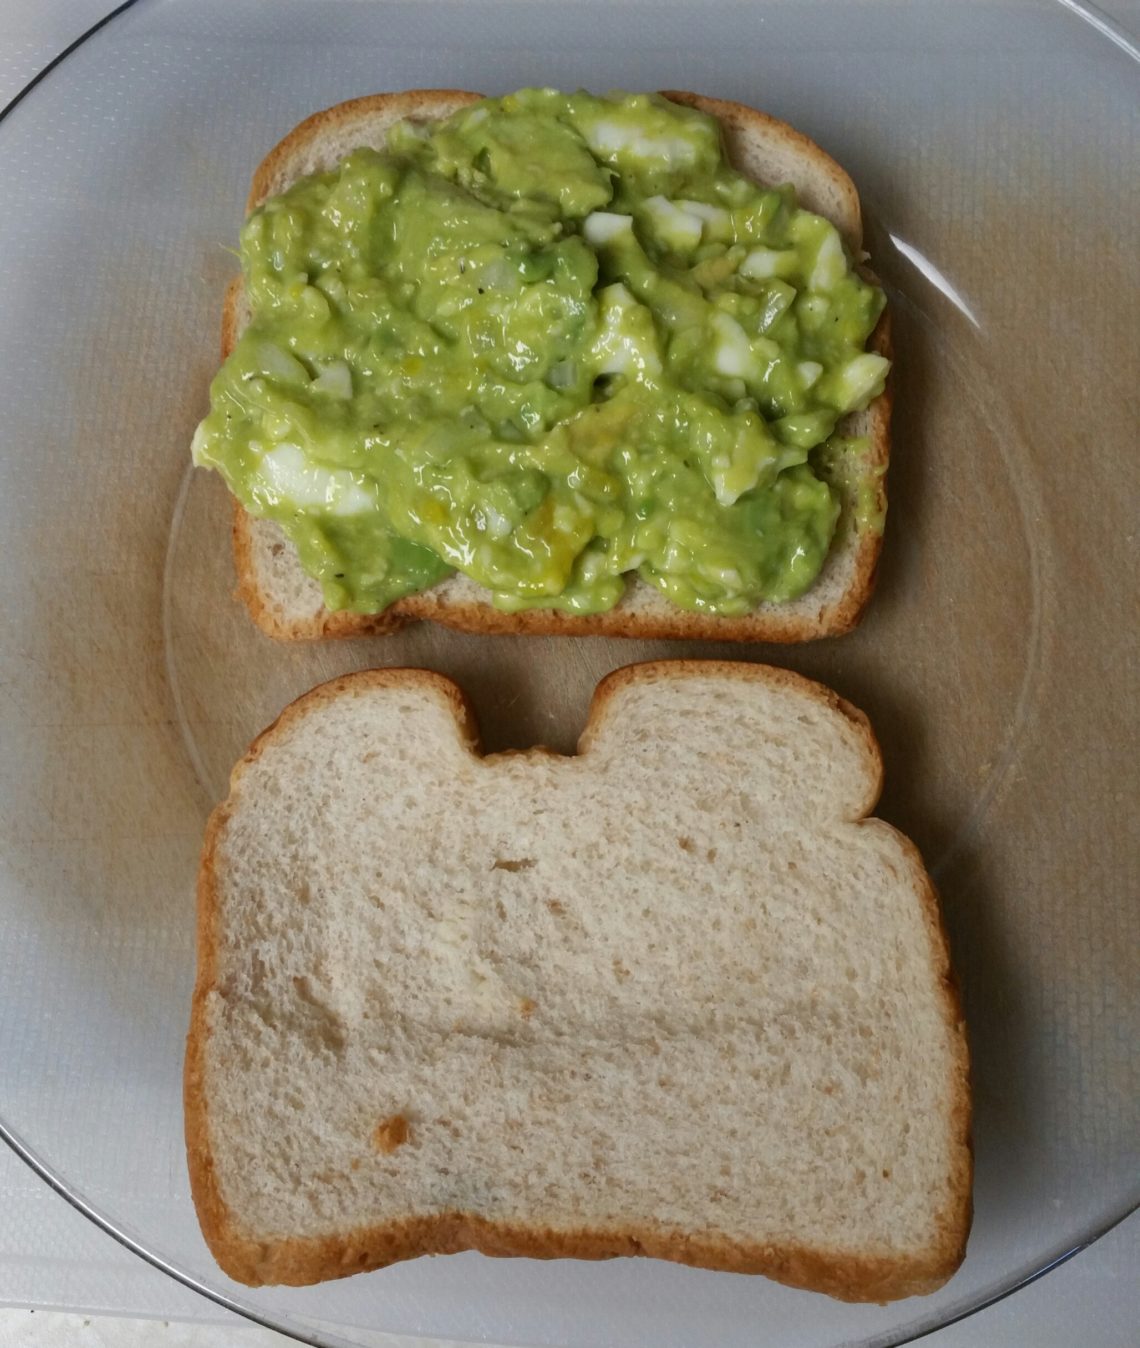 Avocado egg salad spread and almost ready to be eaten!